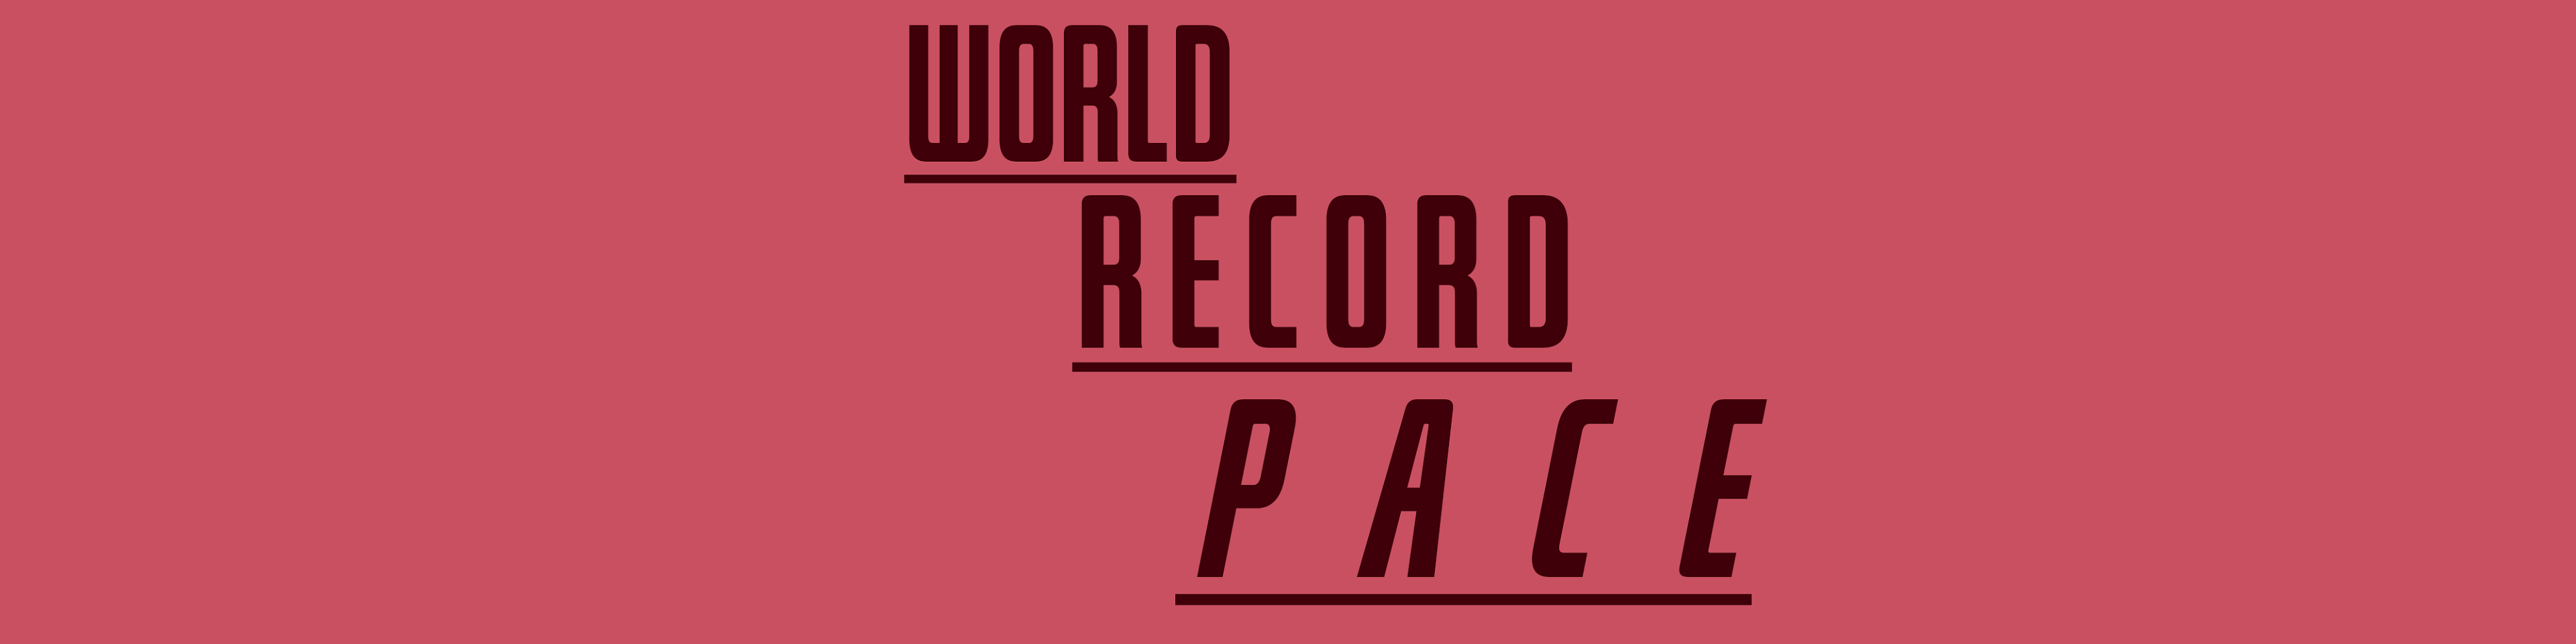 World Record Pace